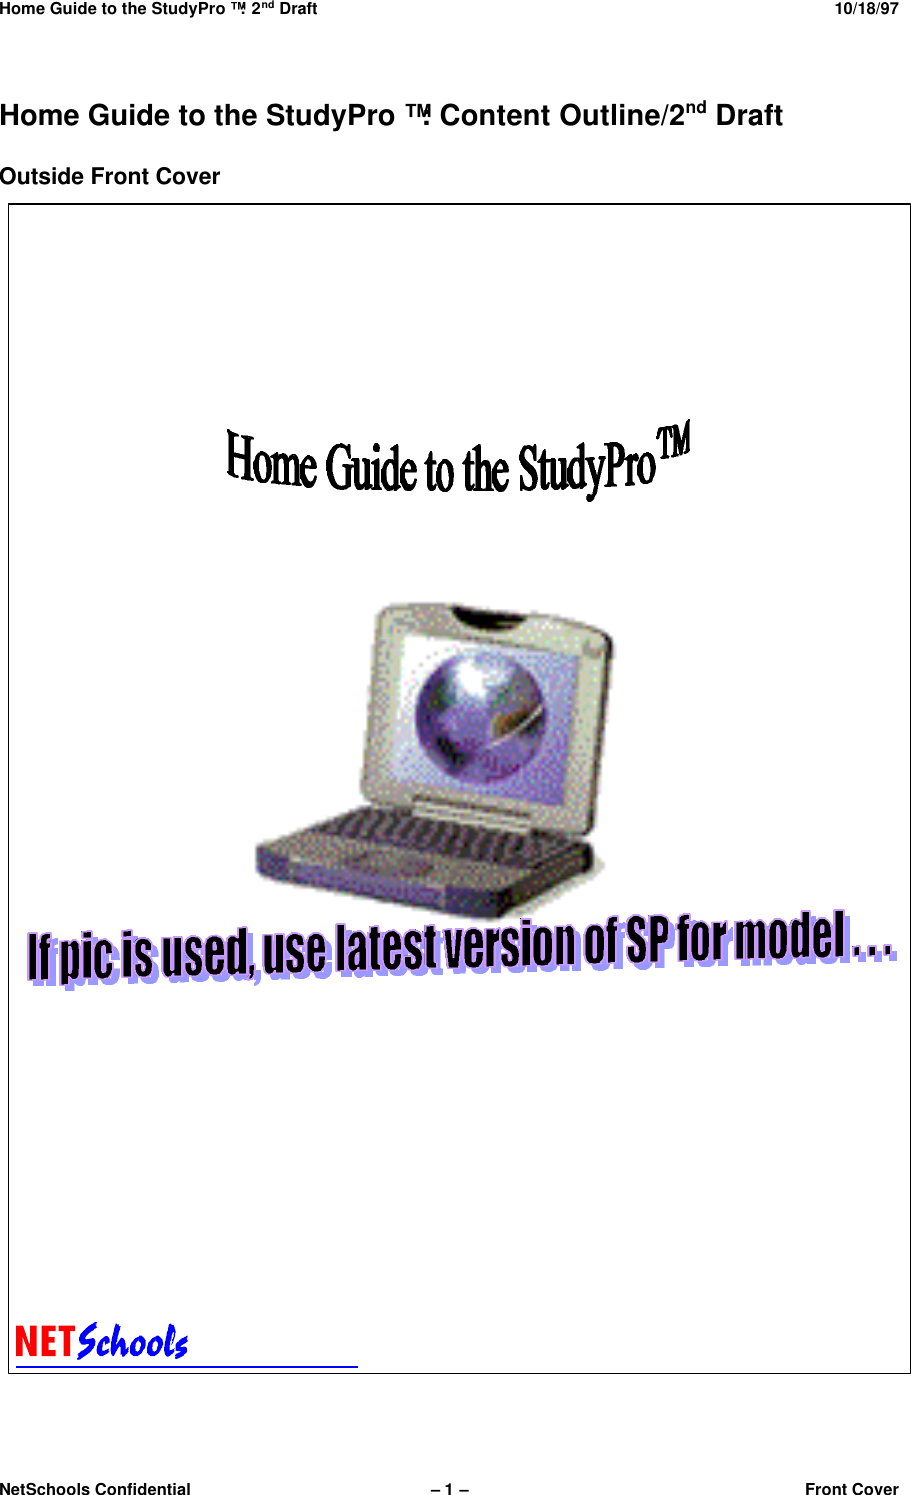 Home Guide to the StudyPro™: 2nd Draft 10/18/97NetSchools Confidential – 1 –Front CoverHome Guide to the StudyPro™: Content Outline/2nd DraftOutside Front Cover